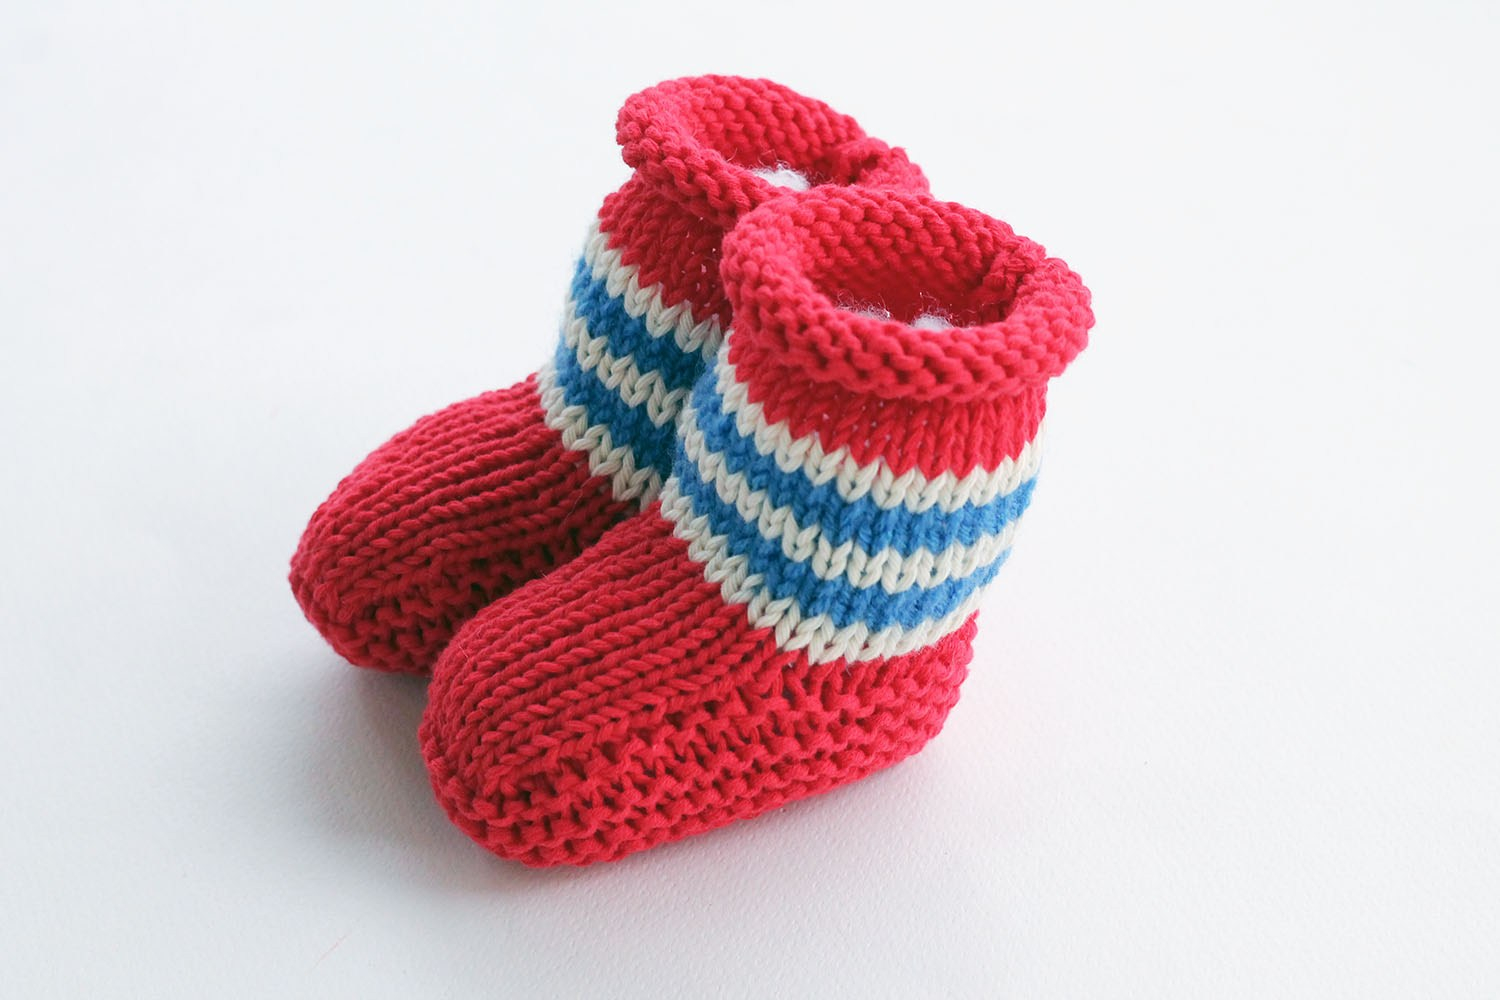 Knitting Patterns For Baby Booties Pirate Ba Booties Pattern Free Knitting Patterns Handy Little Me